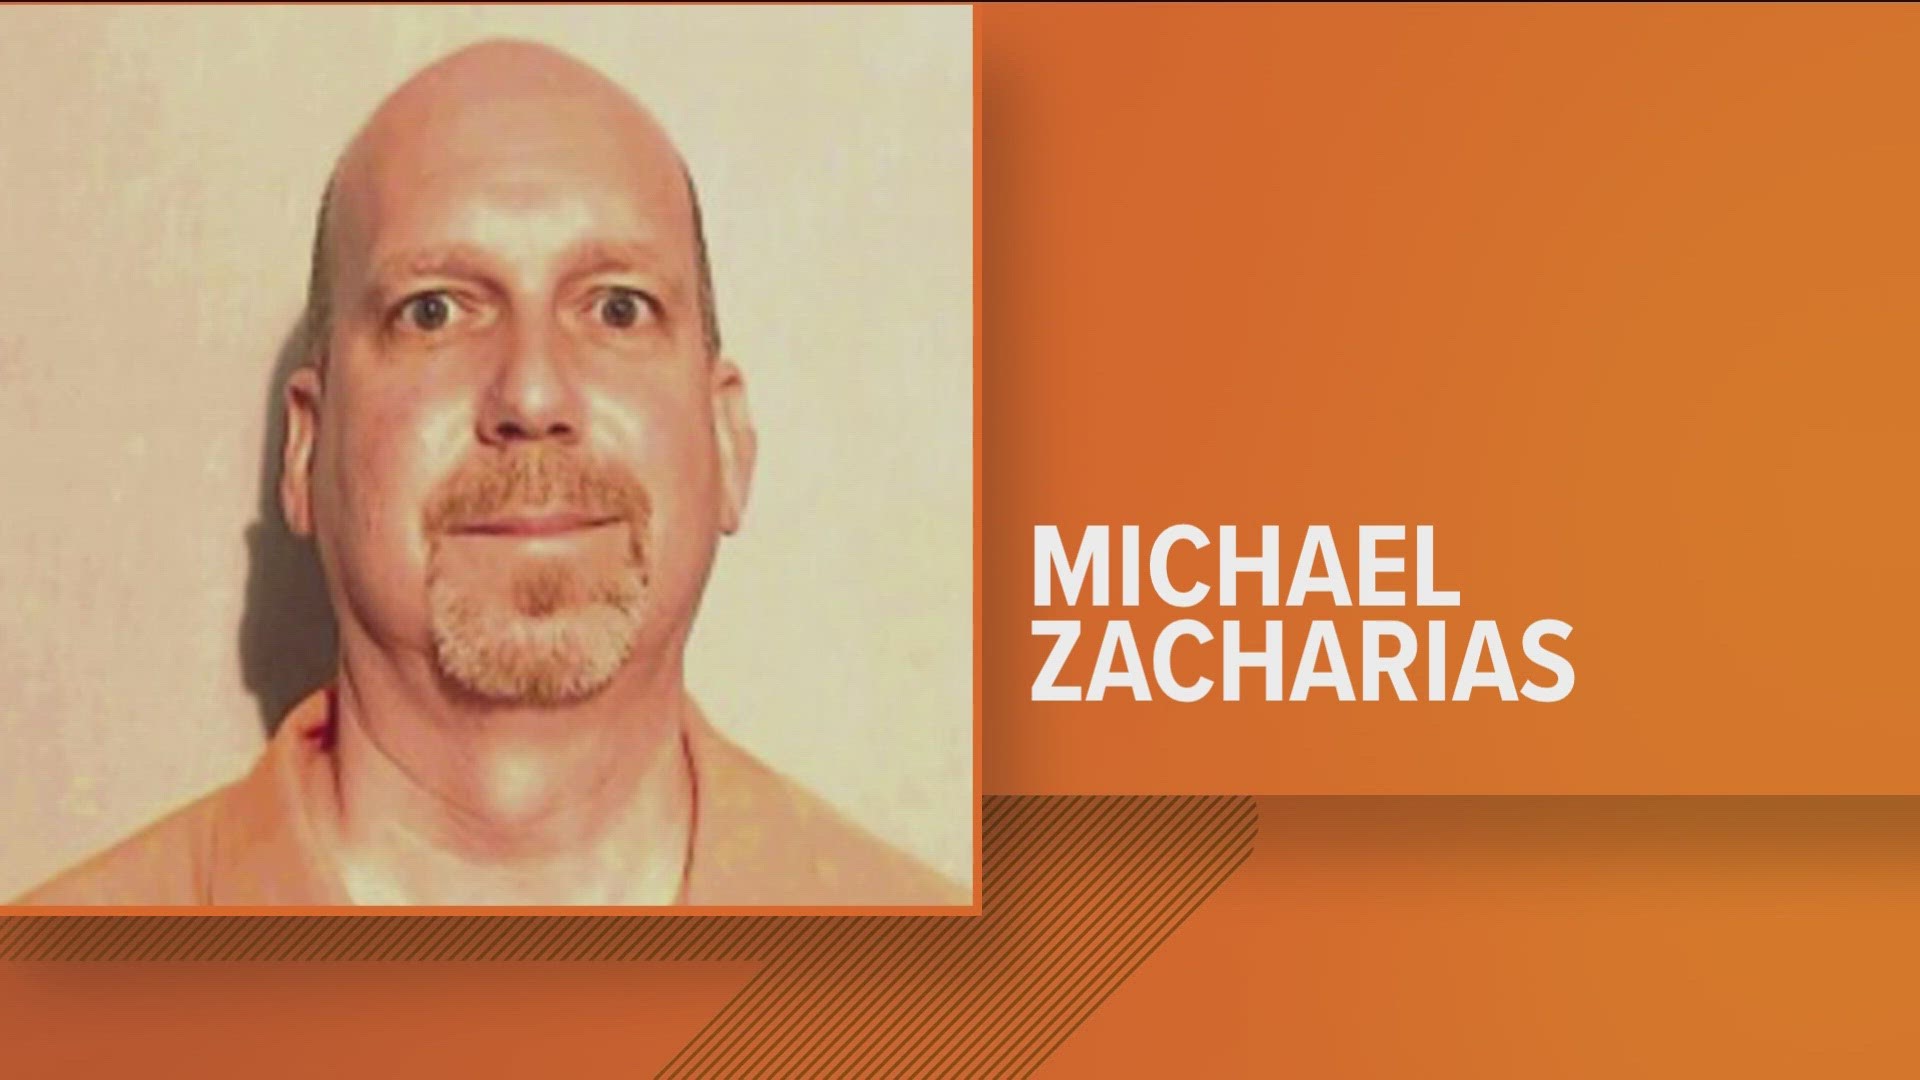 Michael Zacharias, 53, was found guilty of 5 charges relating to sex trafficking earlier this year.